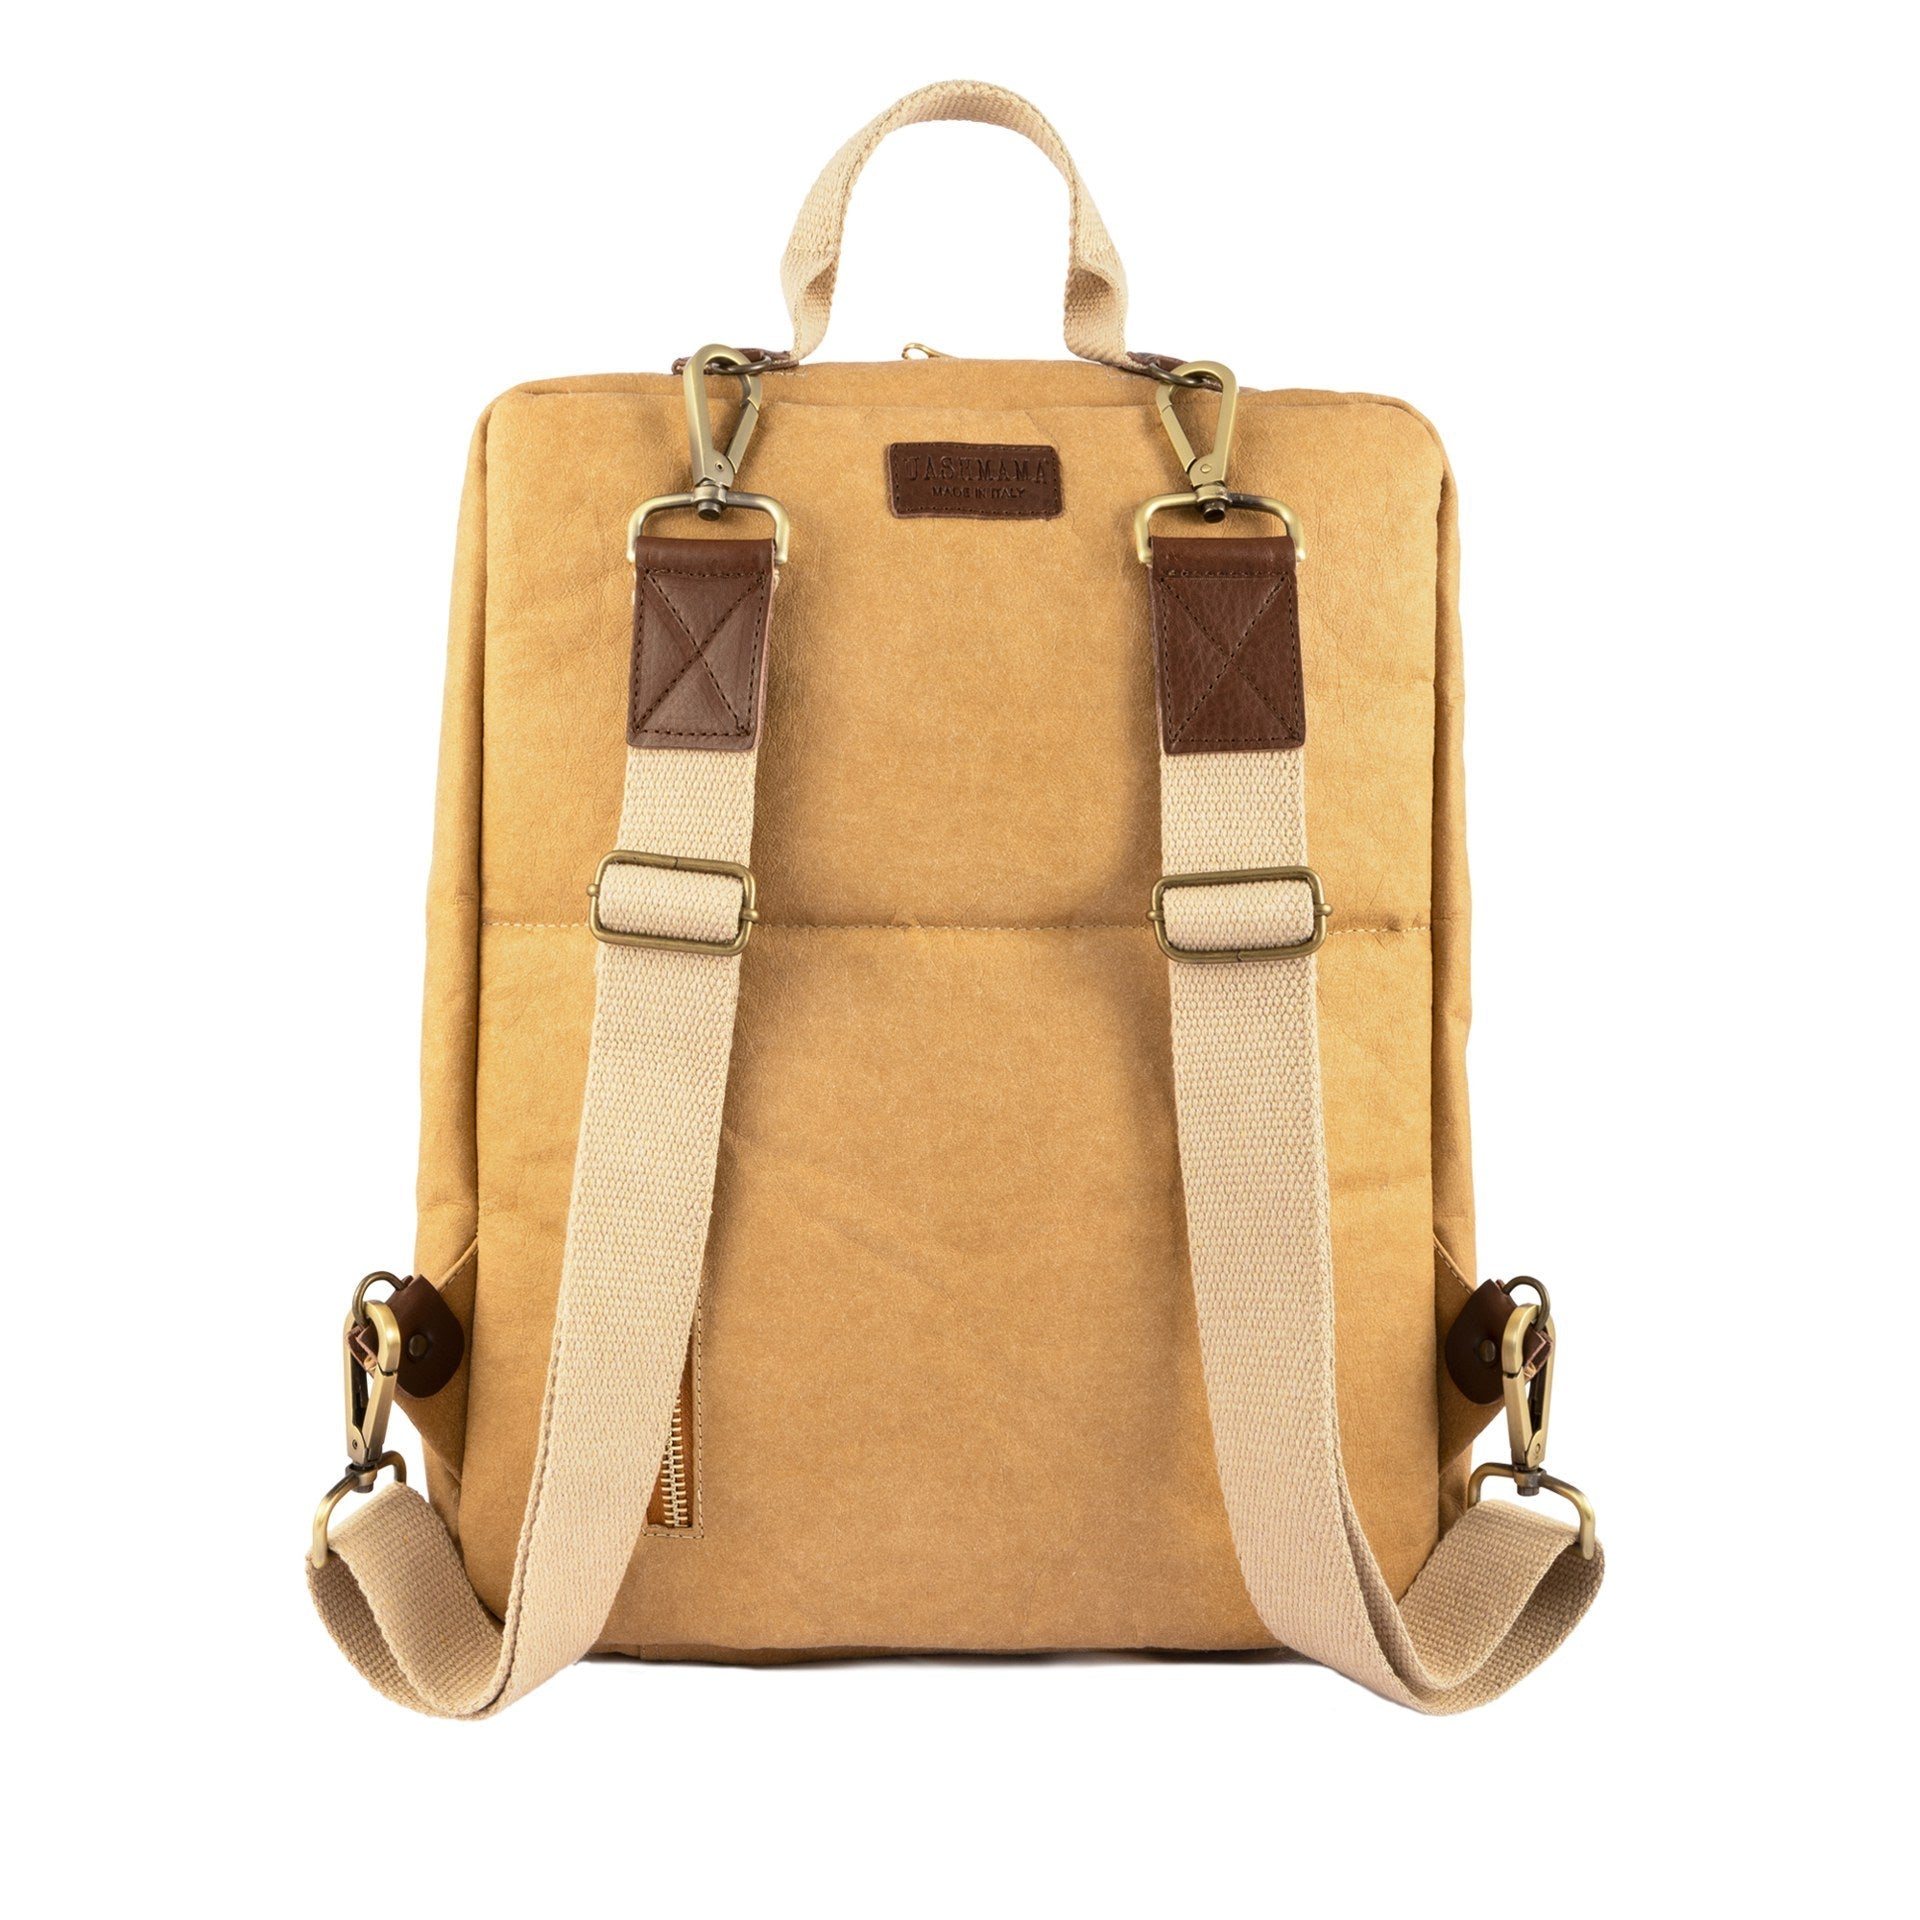 The rear of a washable paper backpack is shown. The backpack is in a light tan colour and has a top carry handle, and two recycled cotton straps. A vertical zip pocket is also shown.